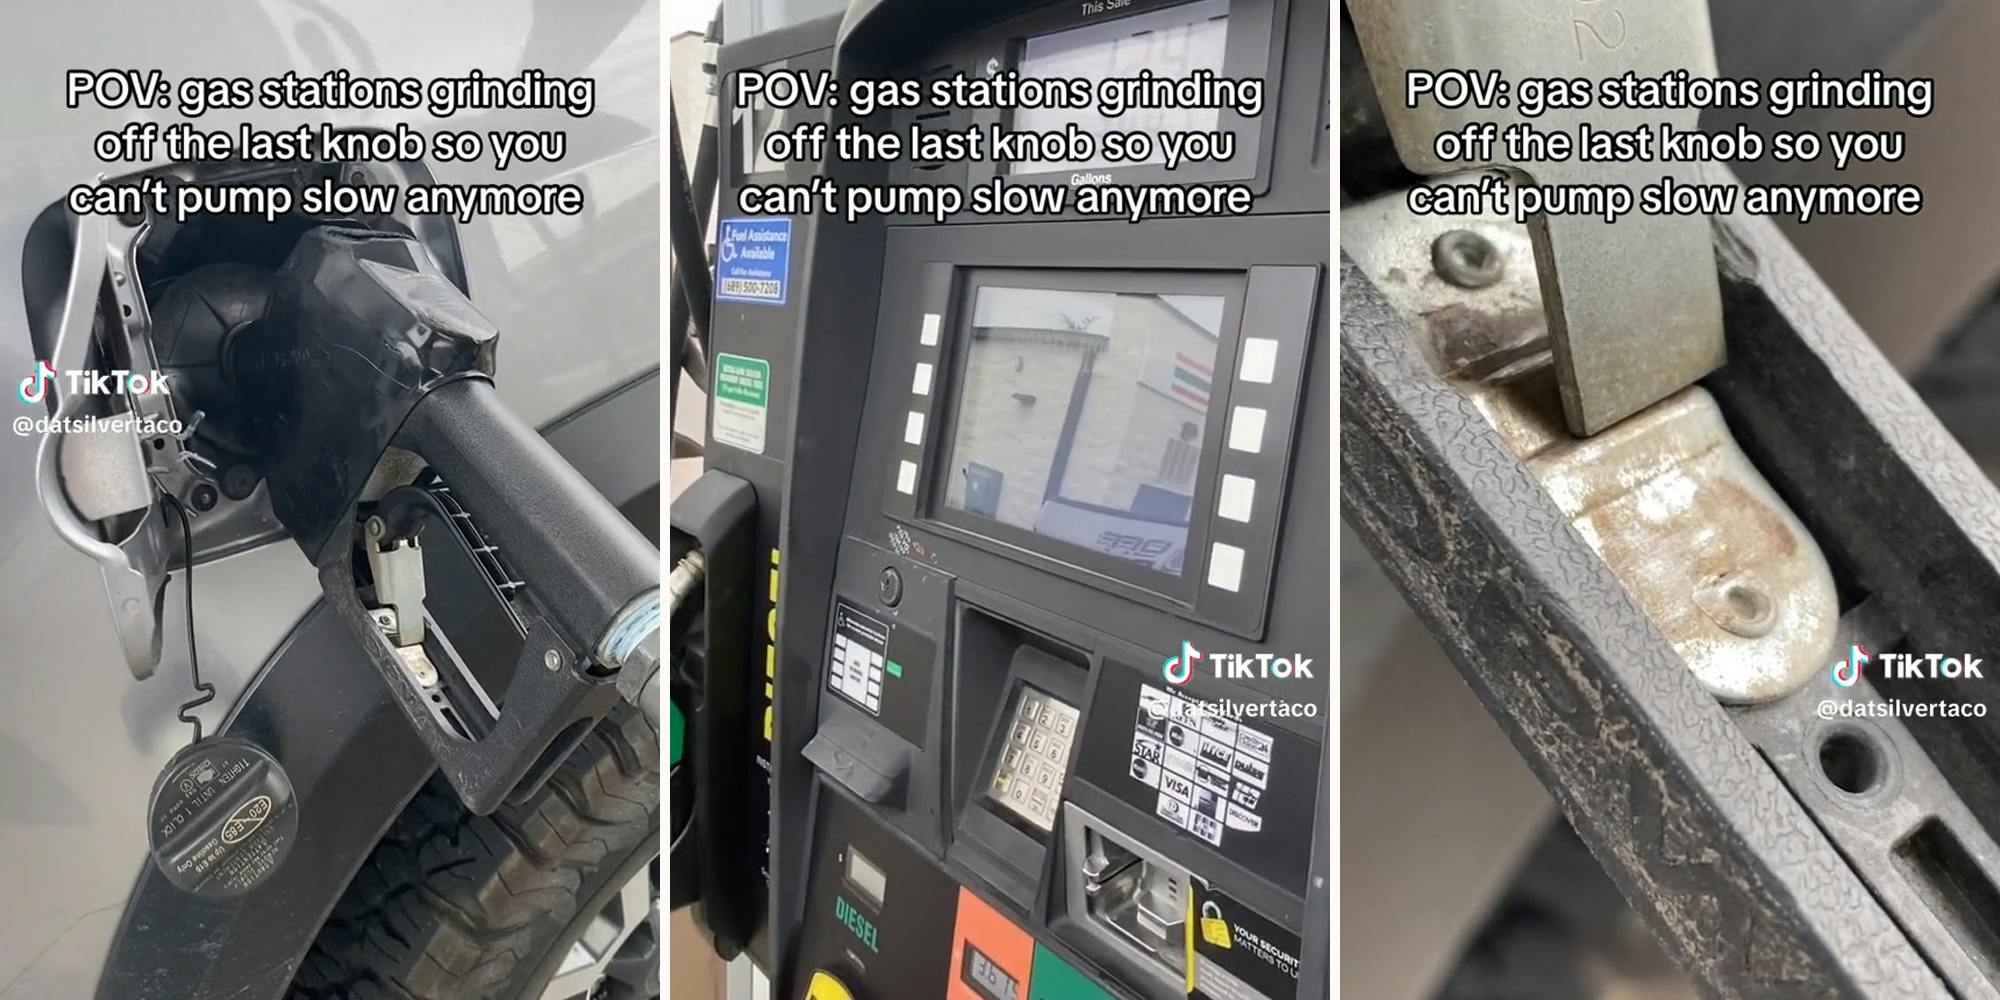 gas pump in vehicle (l) gas pump (c) auto-pump mechanism (r) all captioned "POV: gas stations grinding off the last knob so you can't pump slow anymore"